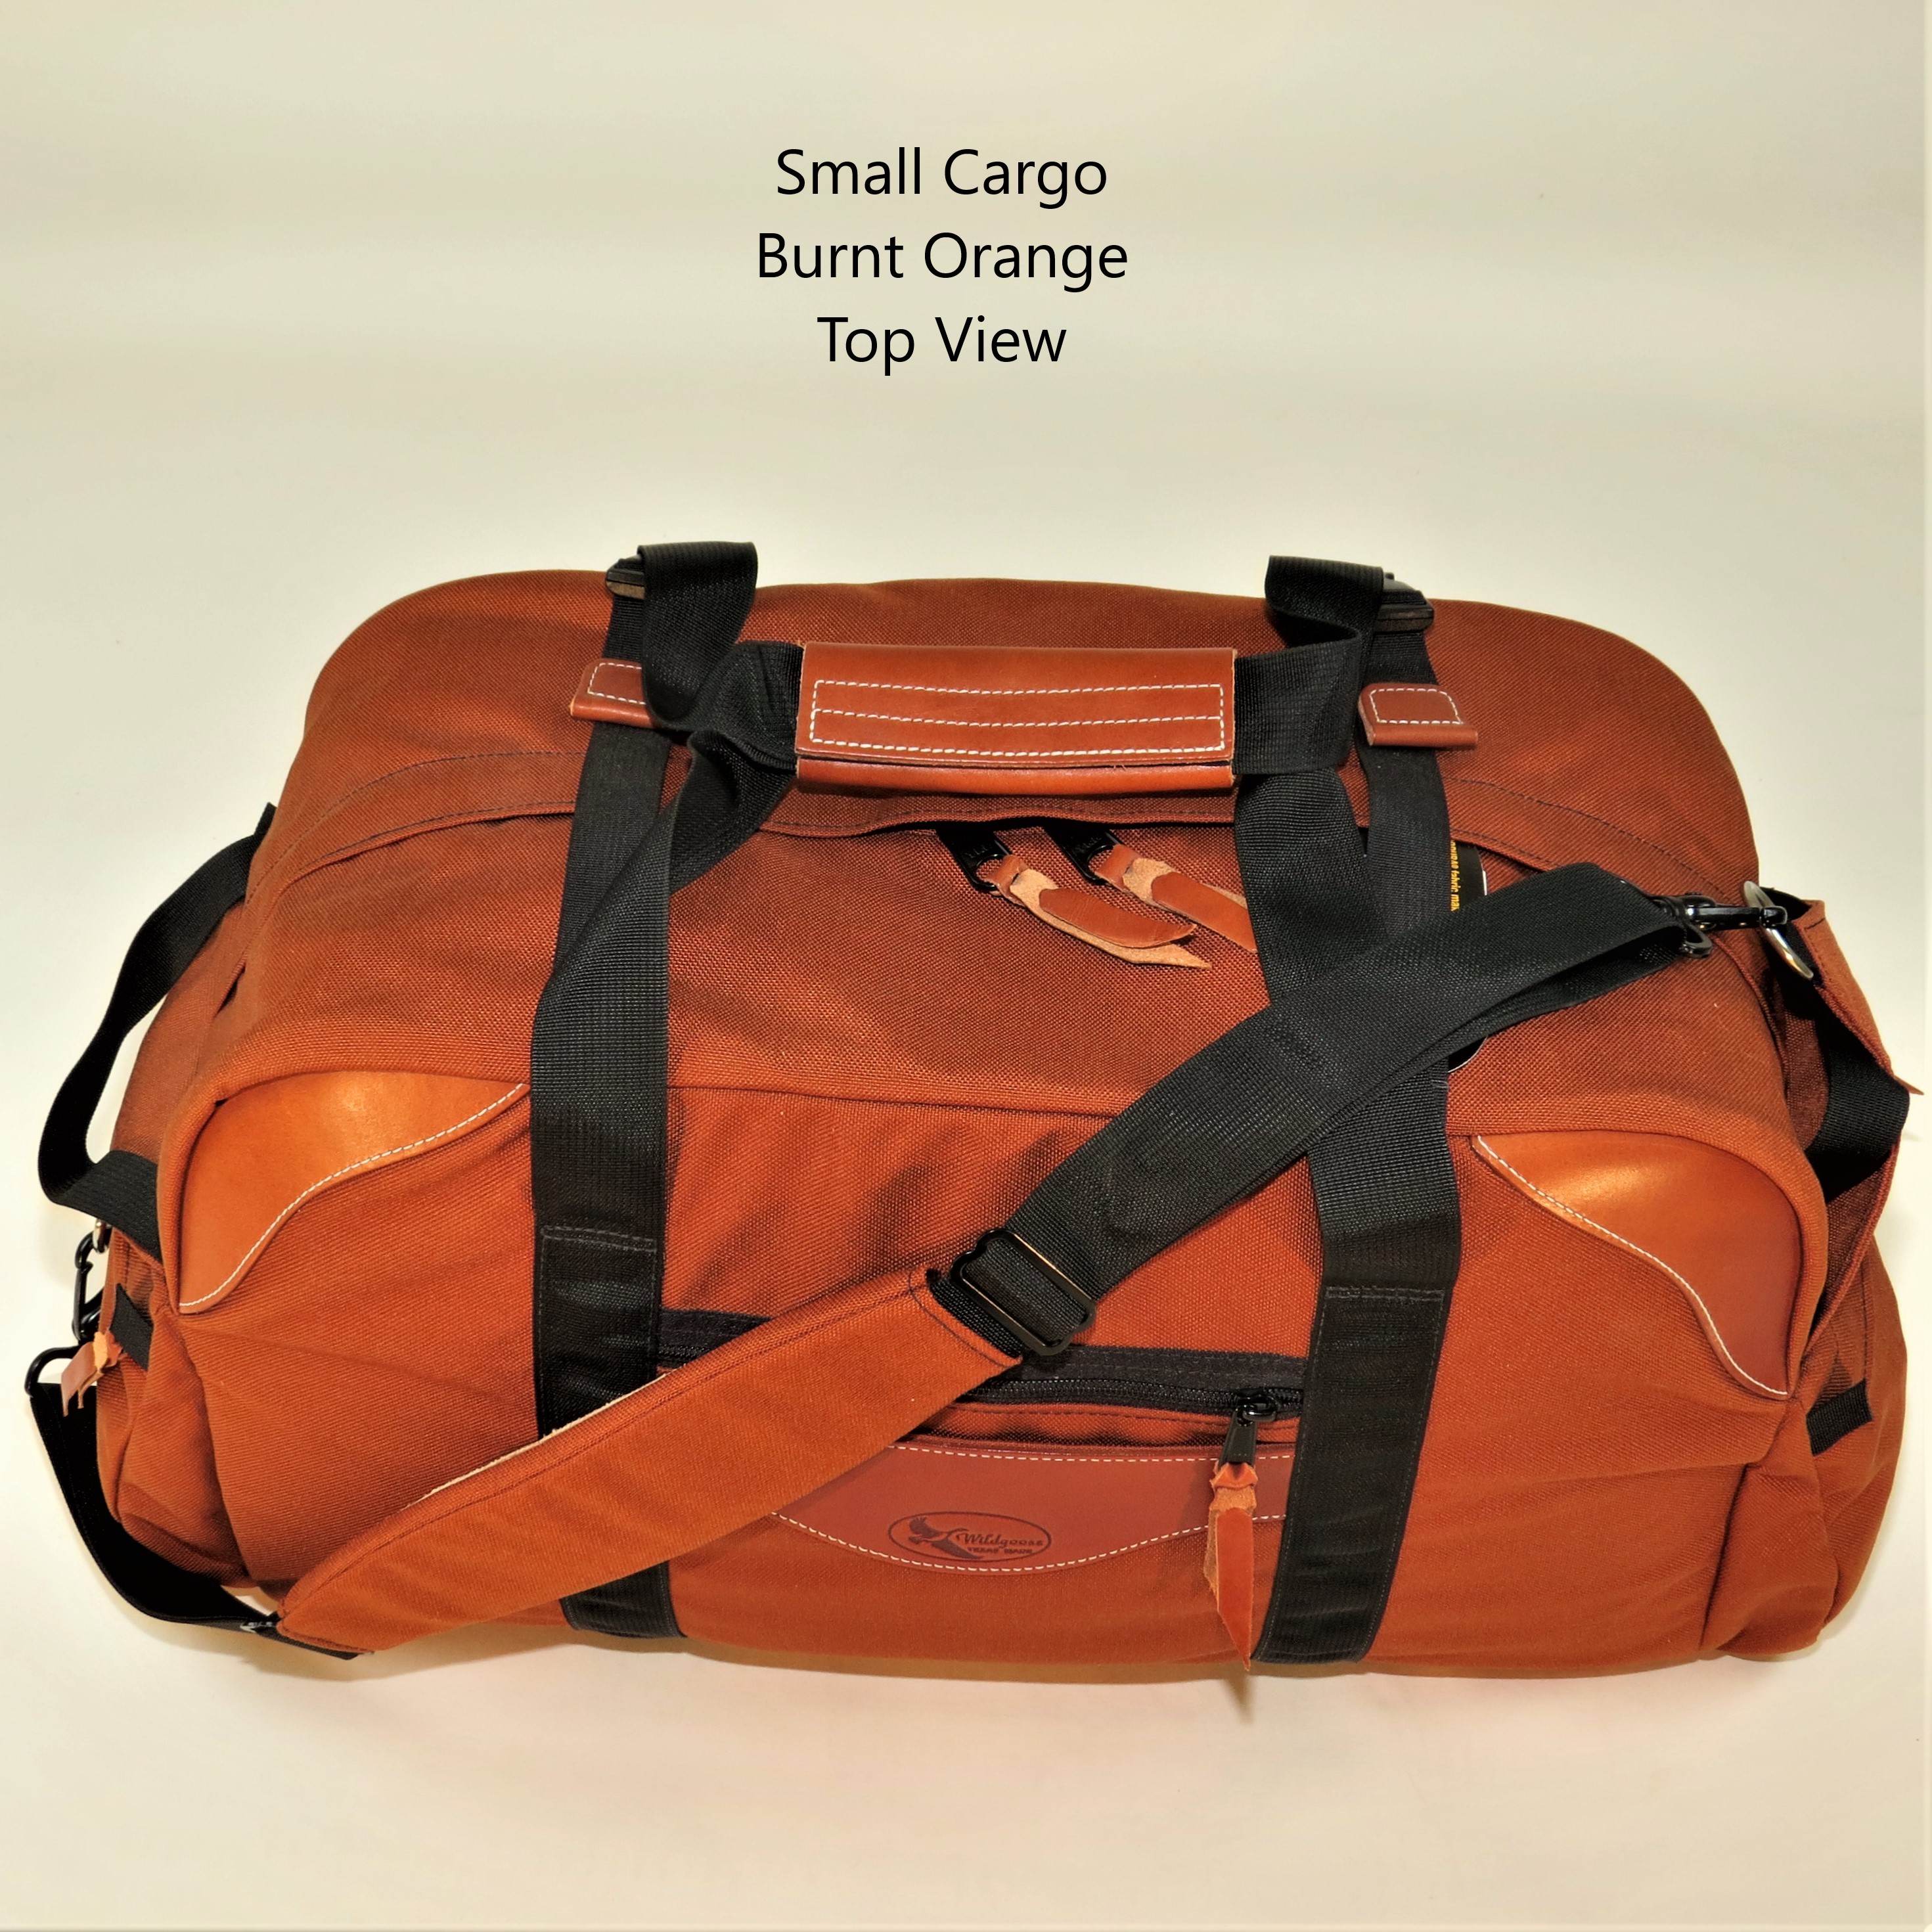 Cargo Luggage - Small Original with Leather Trim